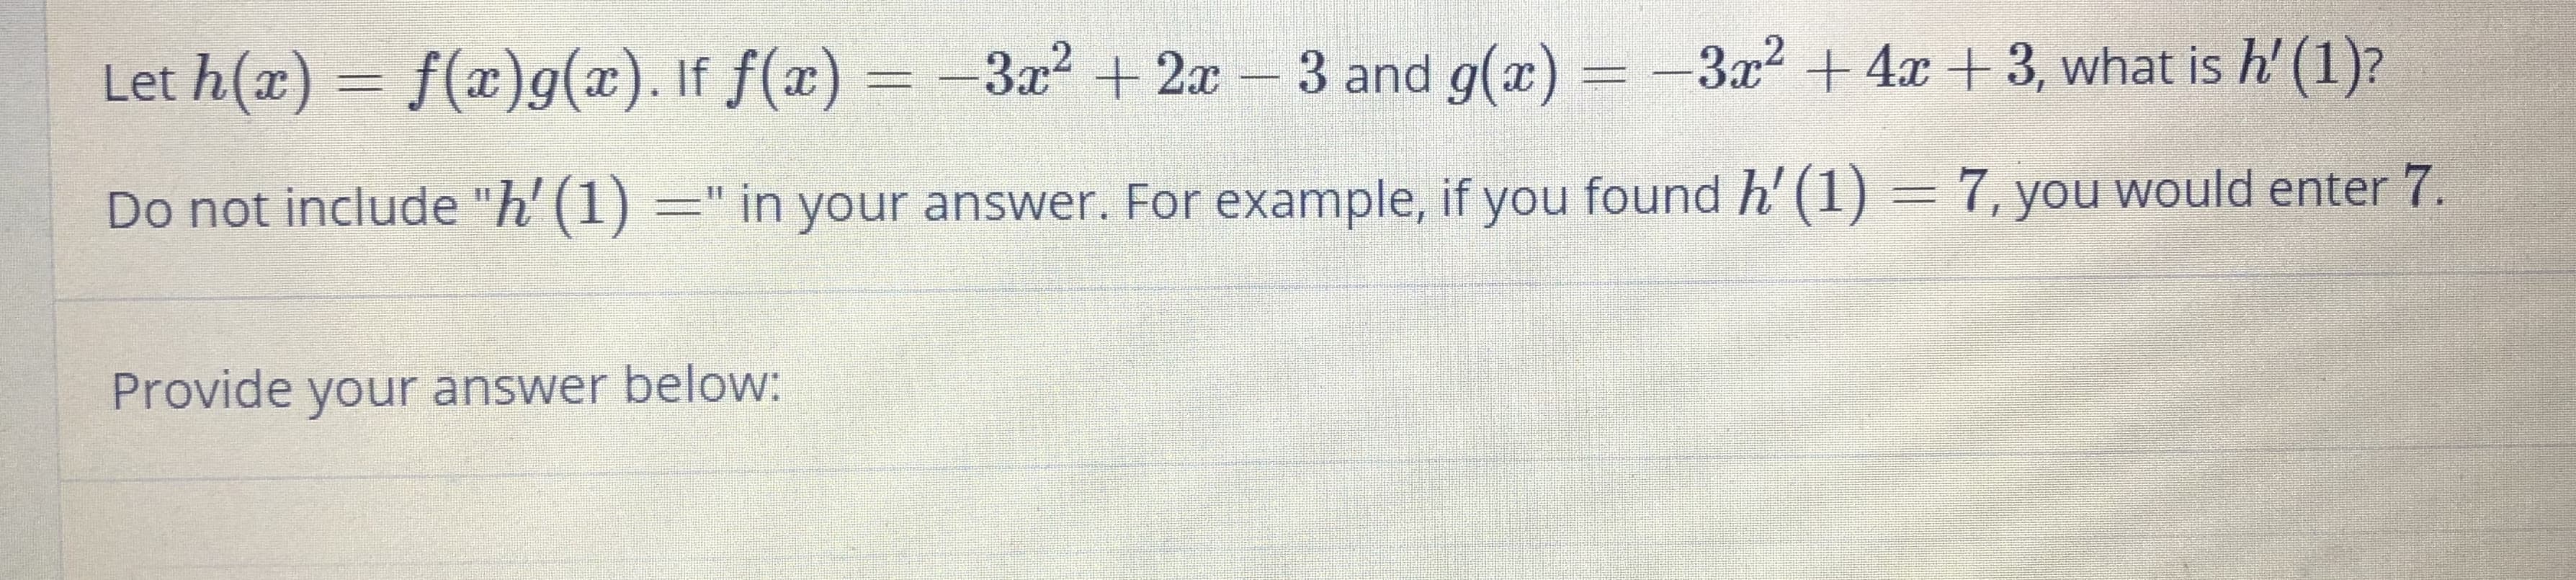 Let h(x) = f(x)g(x). If f(x) =
-3x²+2x
3 and g(x)
3x" + 4x + 3, what is h' (1)?
Do not include "h' (1) =" in your answer. For example, if you found h' (1) = 7, you would enter 7.
